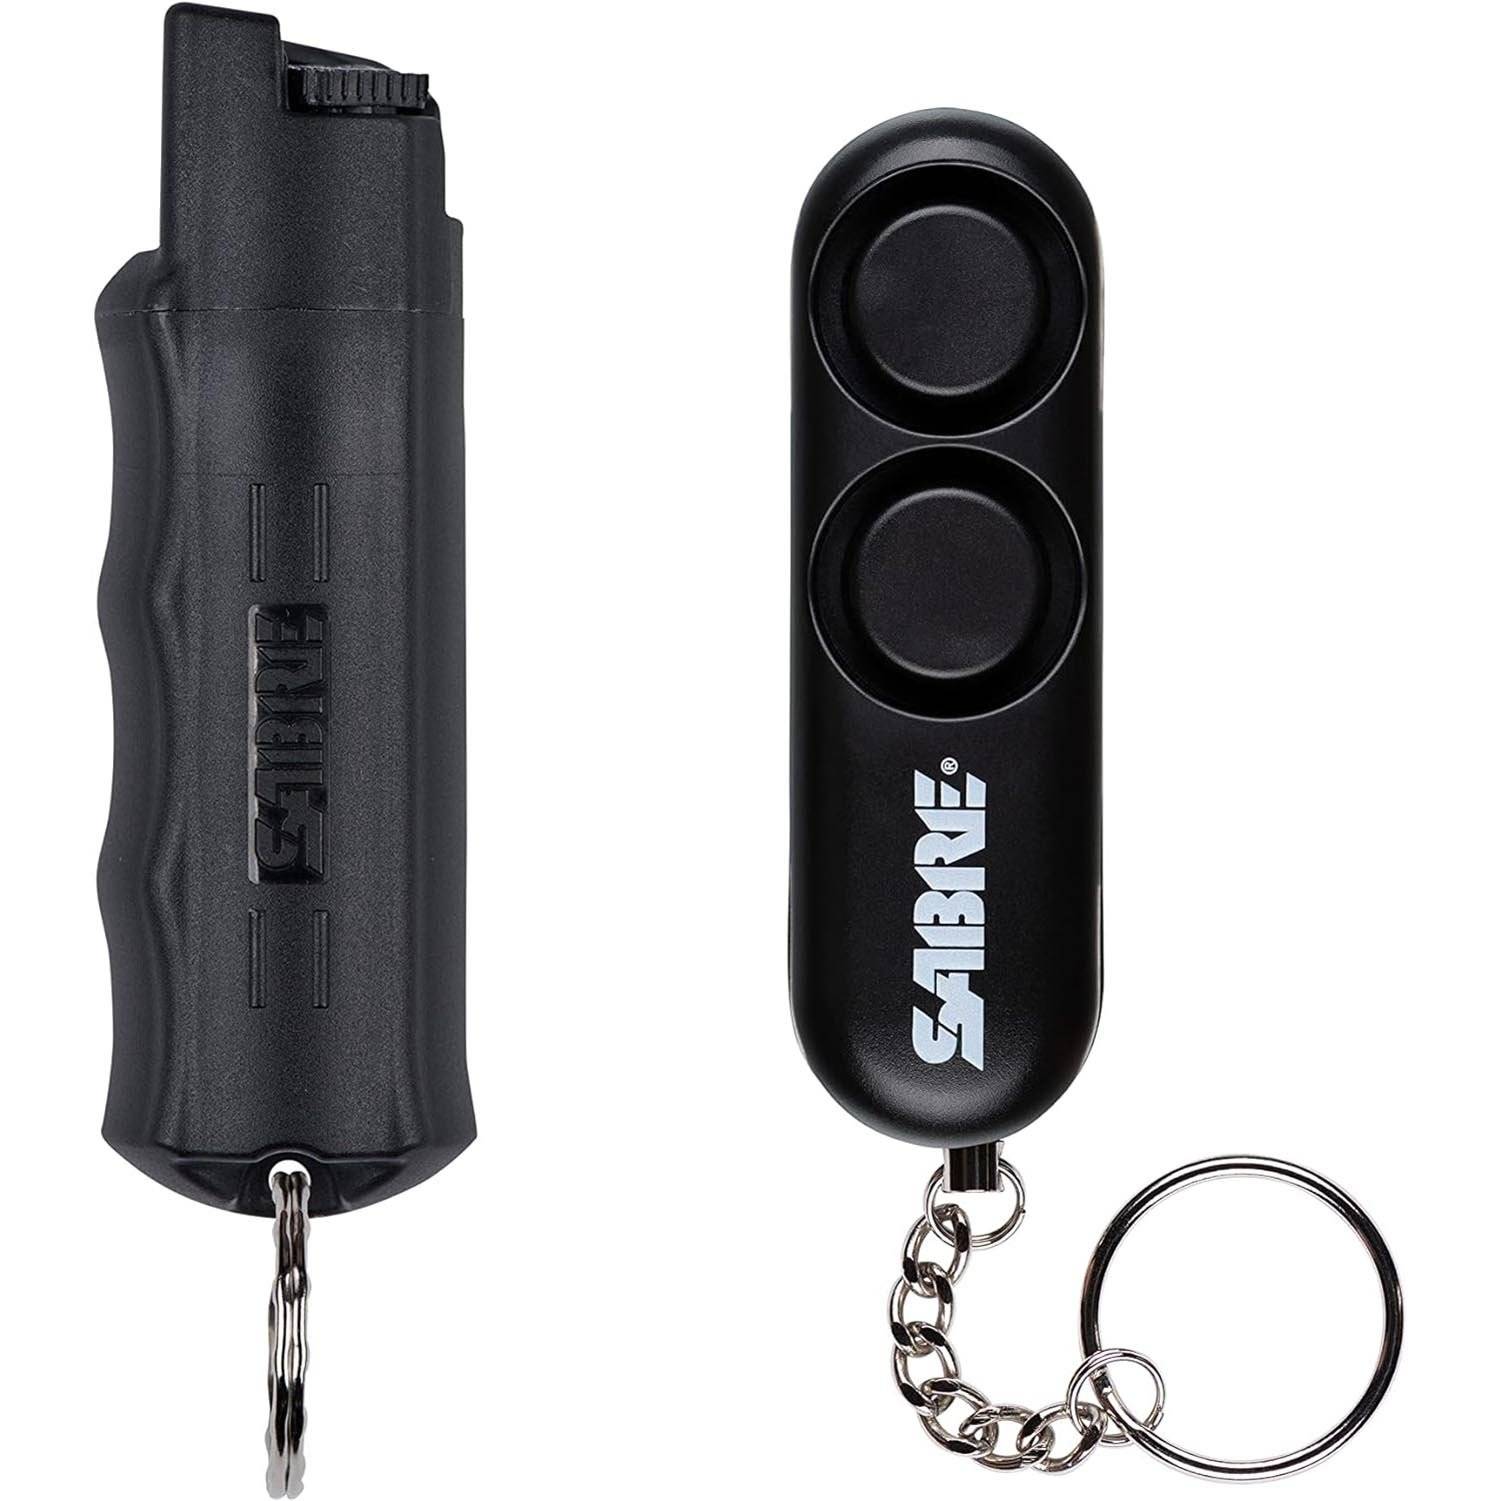 SABRE PERSONAL SAFETY KIT W/ OC SPRAY AND PERSONAL ALARM